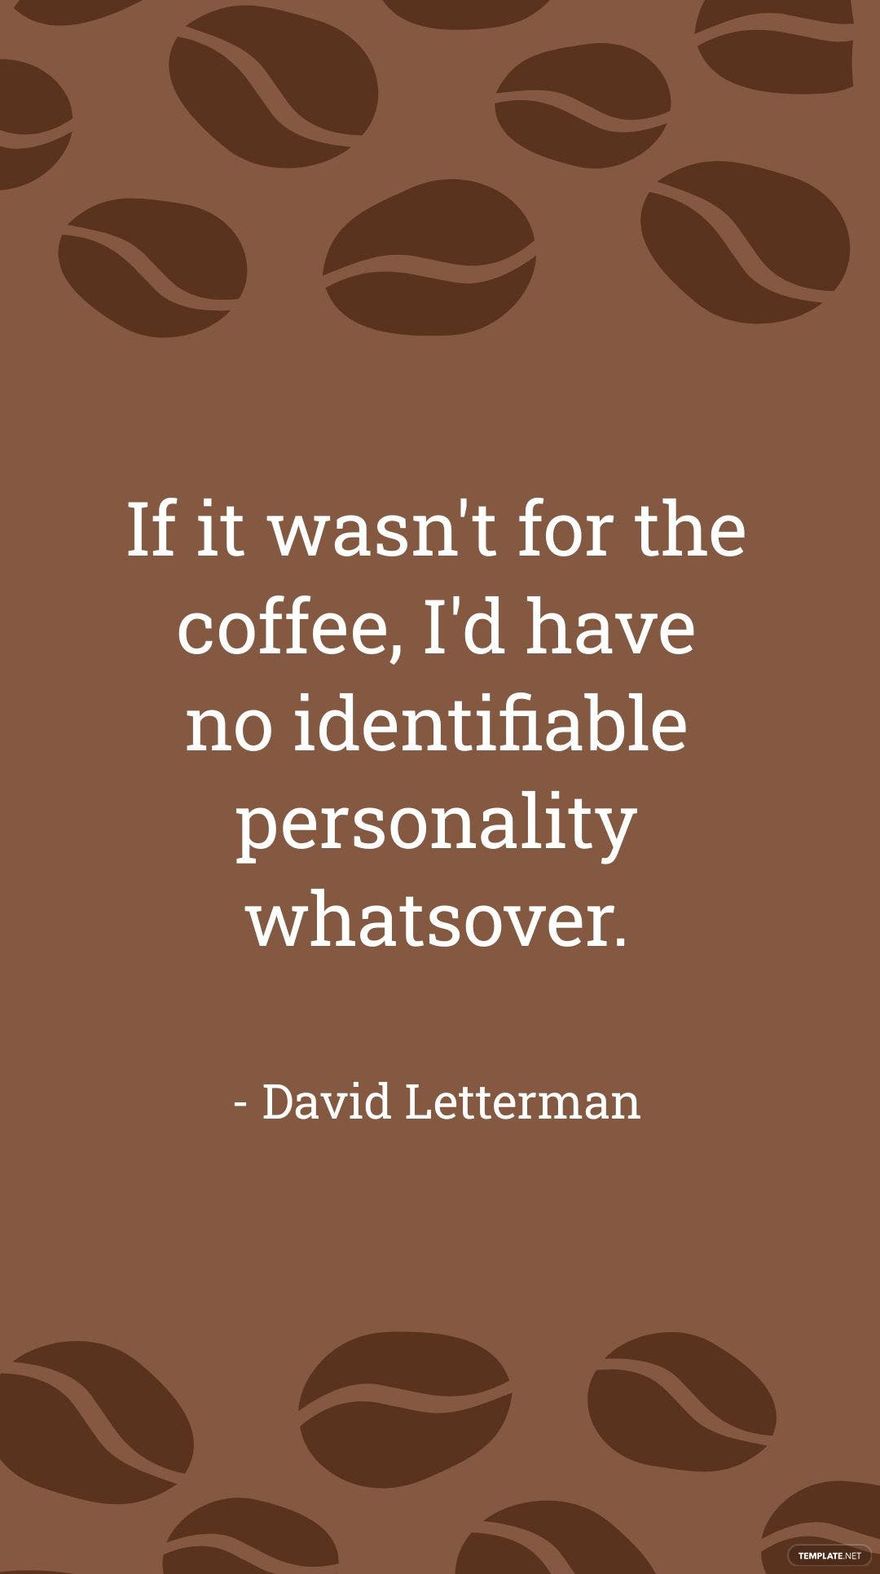 David Letterman - If it wasn't for the coffee, I'd have no identifiable personality whatsover.